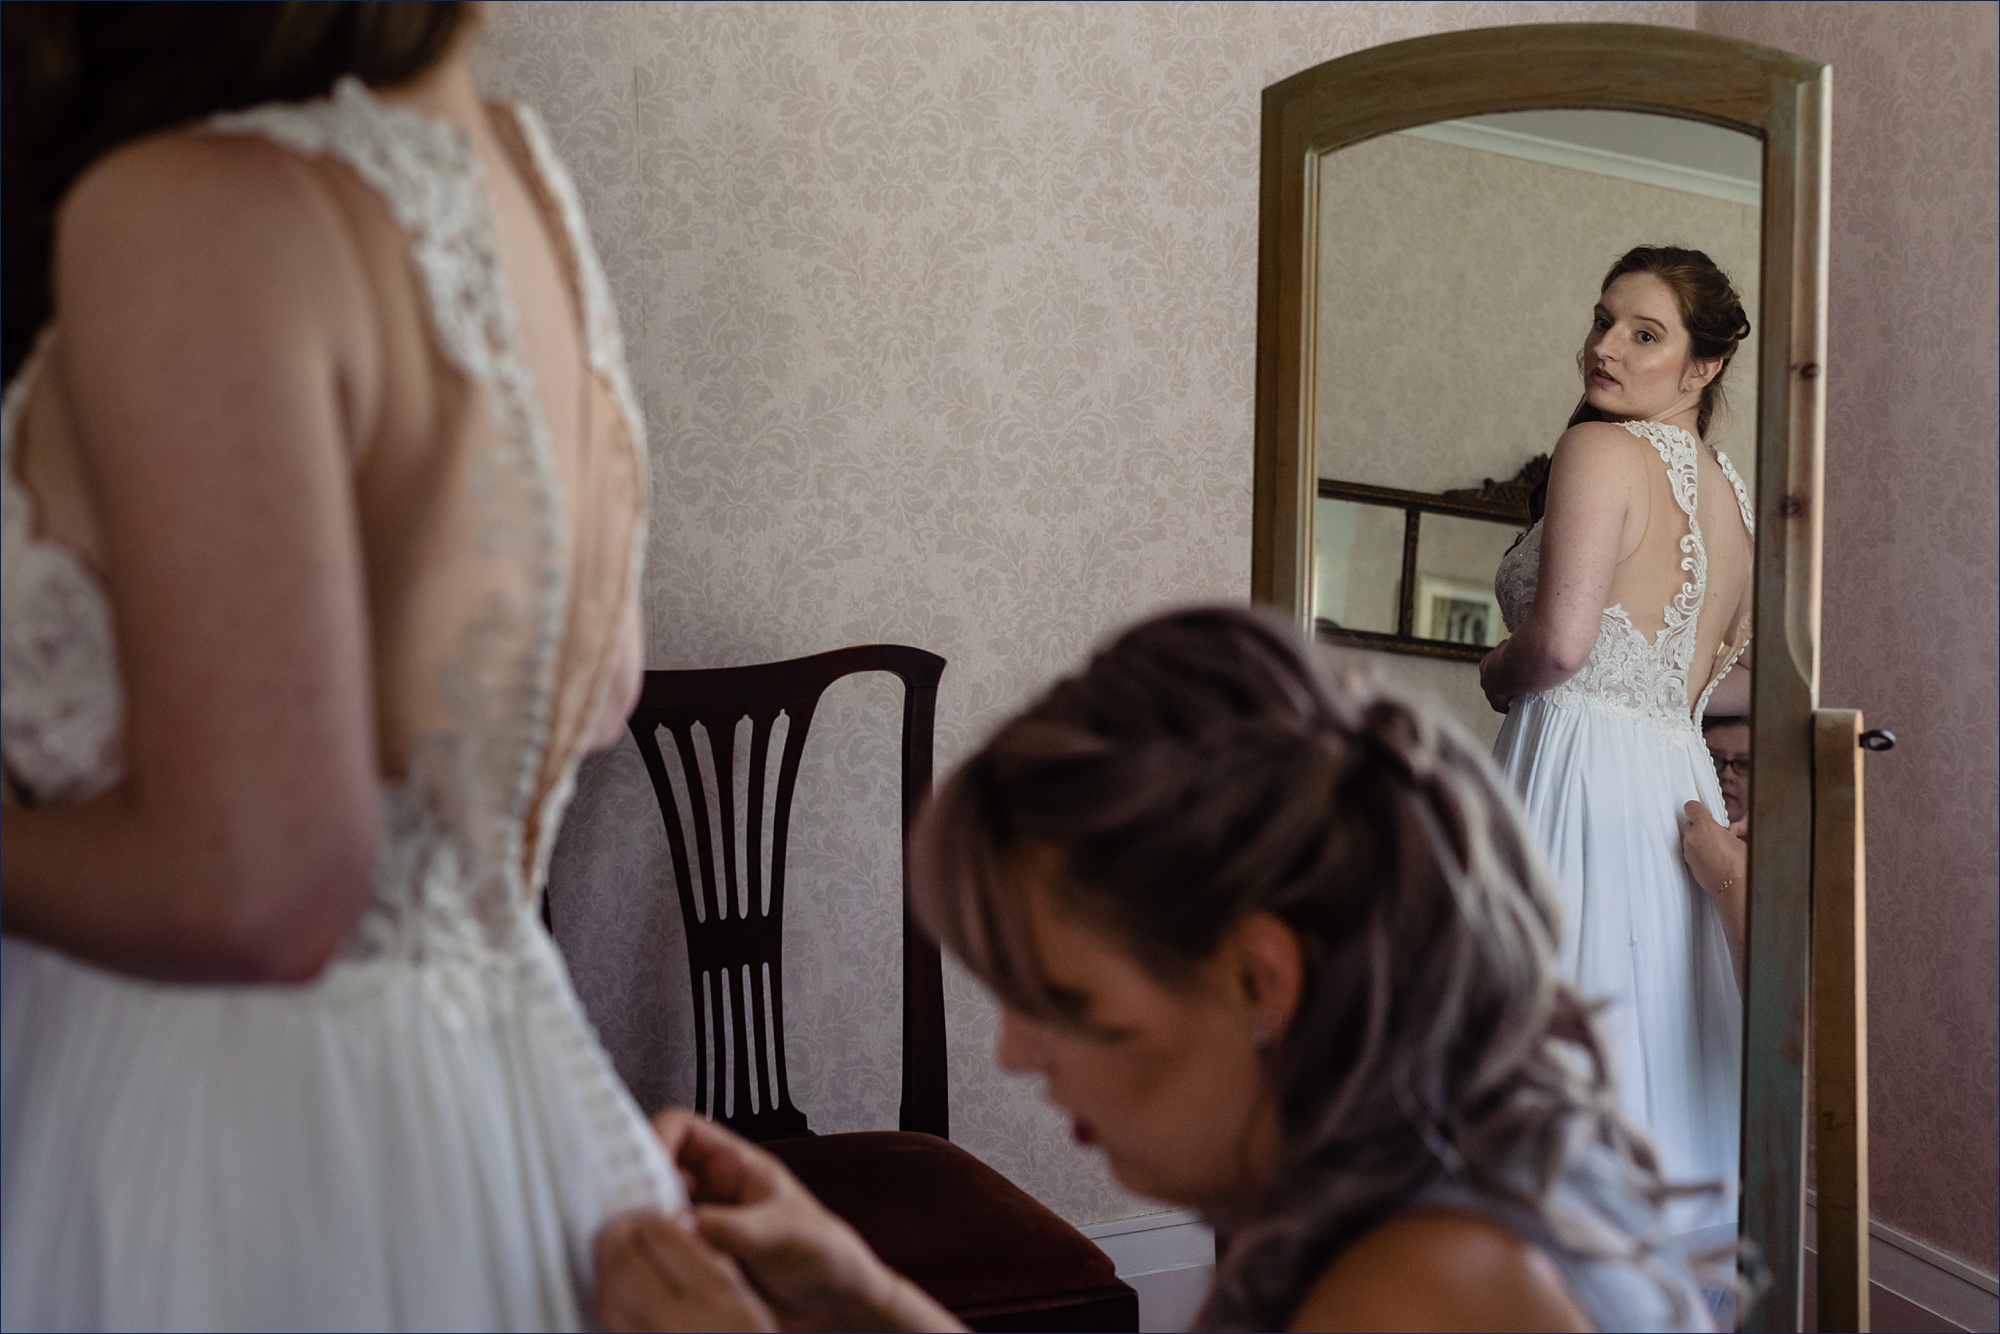 The bride gets buttoned into her wedding gown in the farmhouse at Kitz Farm